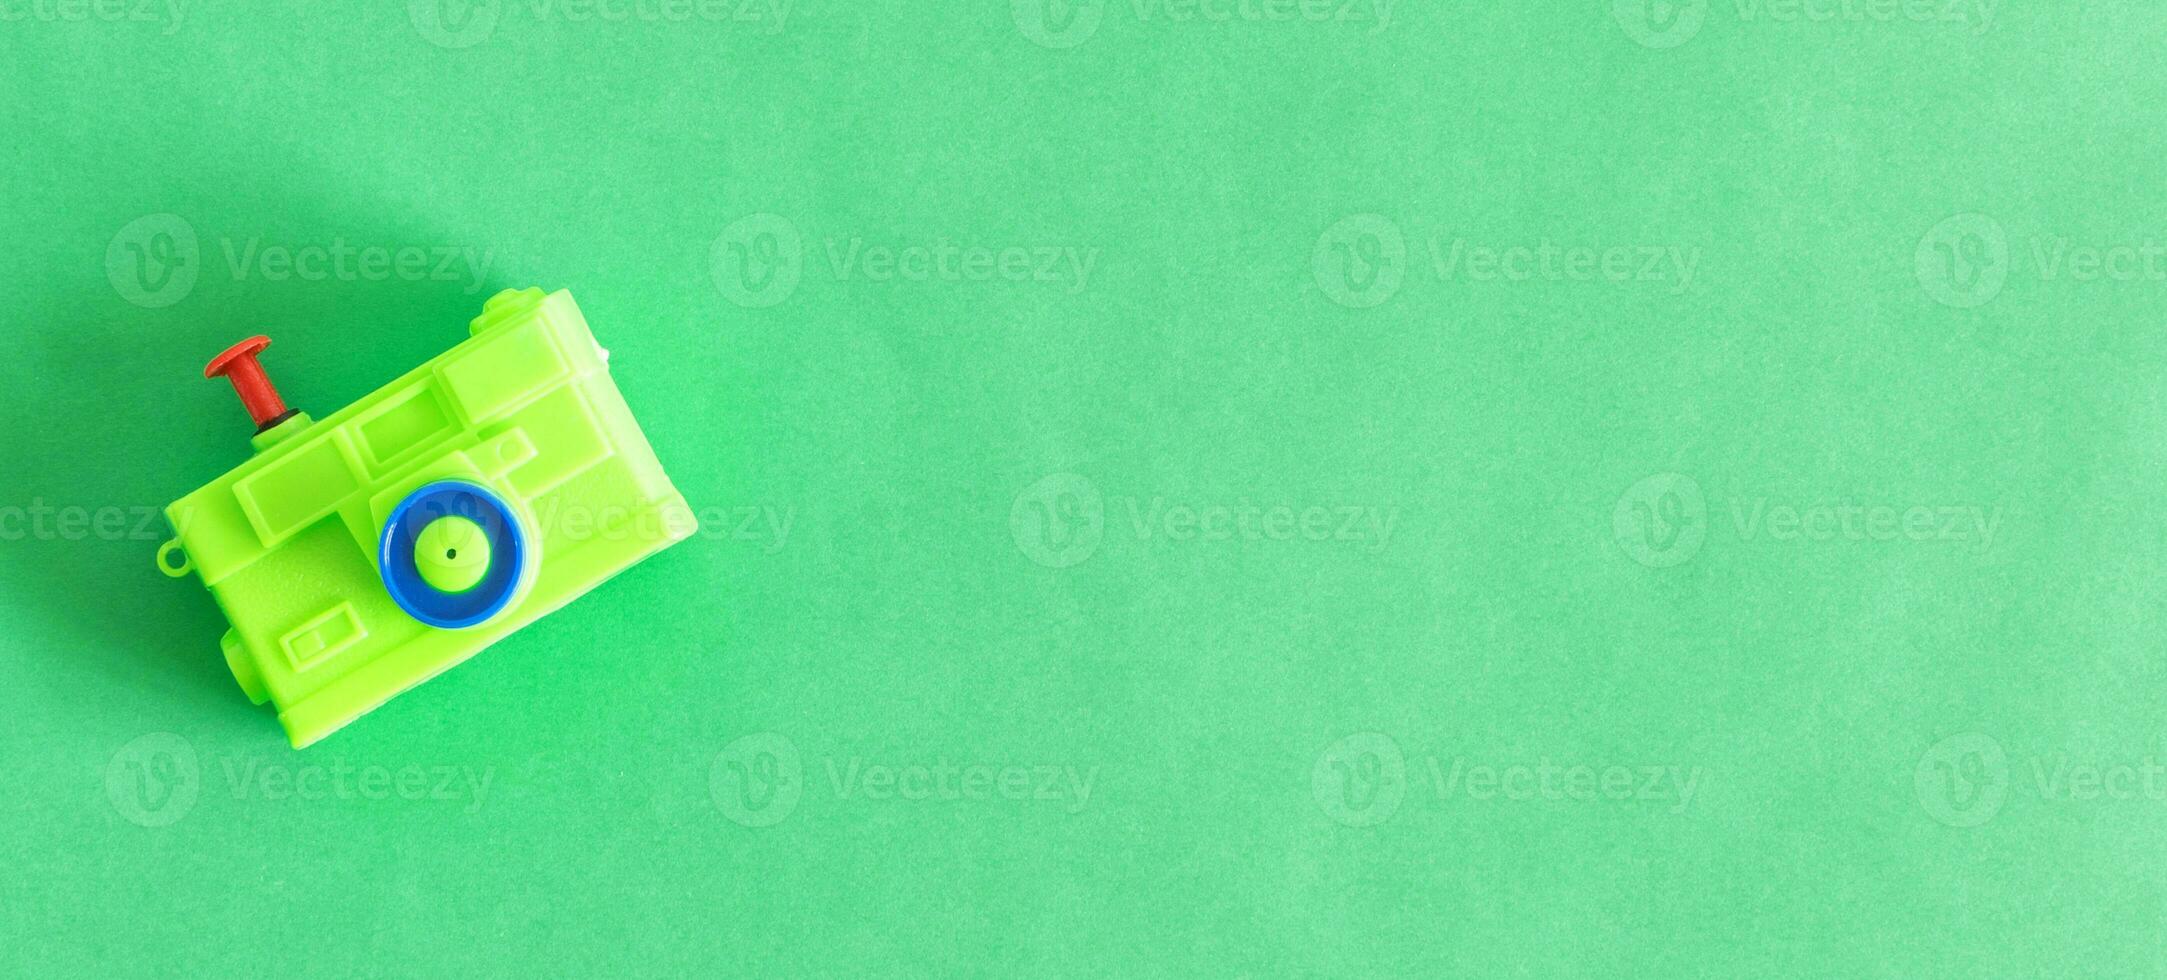 Isolated toy camera, green color, on green background. Top view. photo